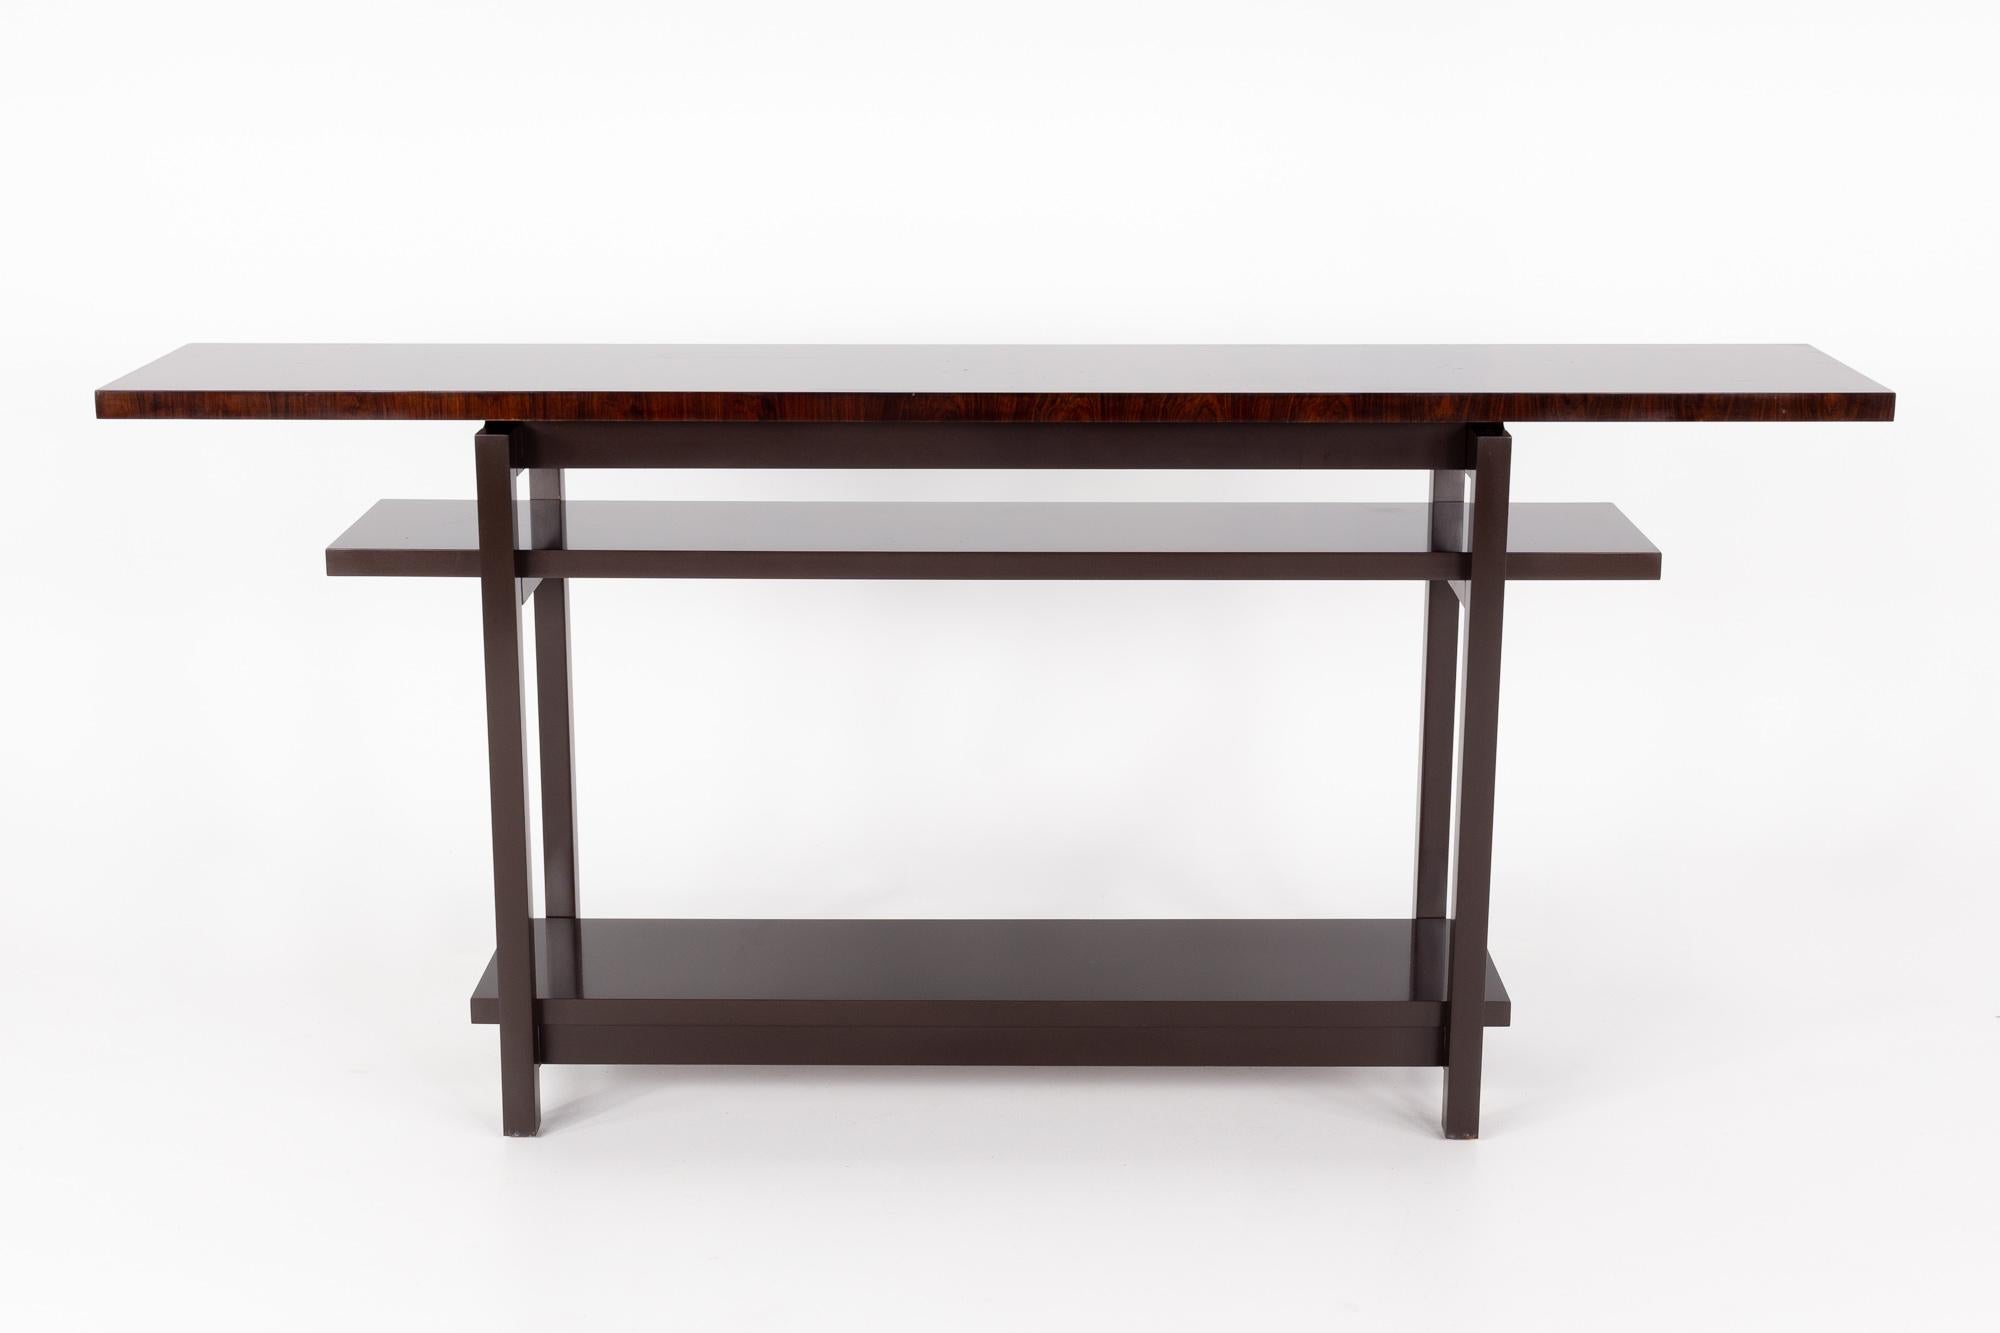 Baker Furniture contemporary console table

This table measures: 76.5 wide x 14.5 deep x 34.5 high

This piece has some light scratches, but is in Great Vintage Condition.

About Photos: We take our photos in a controlled lighting studio to show as